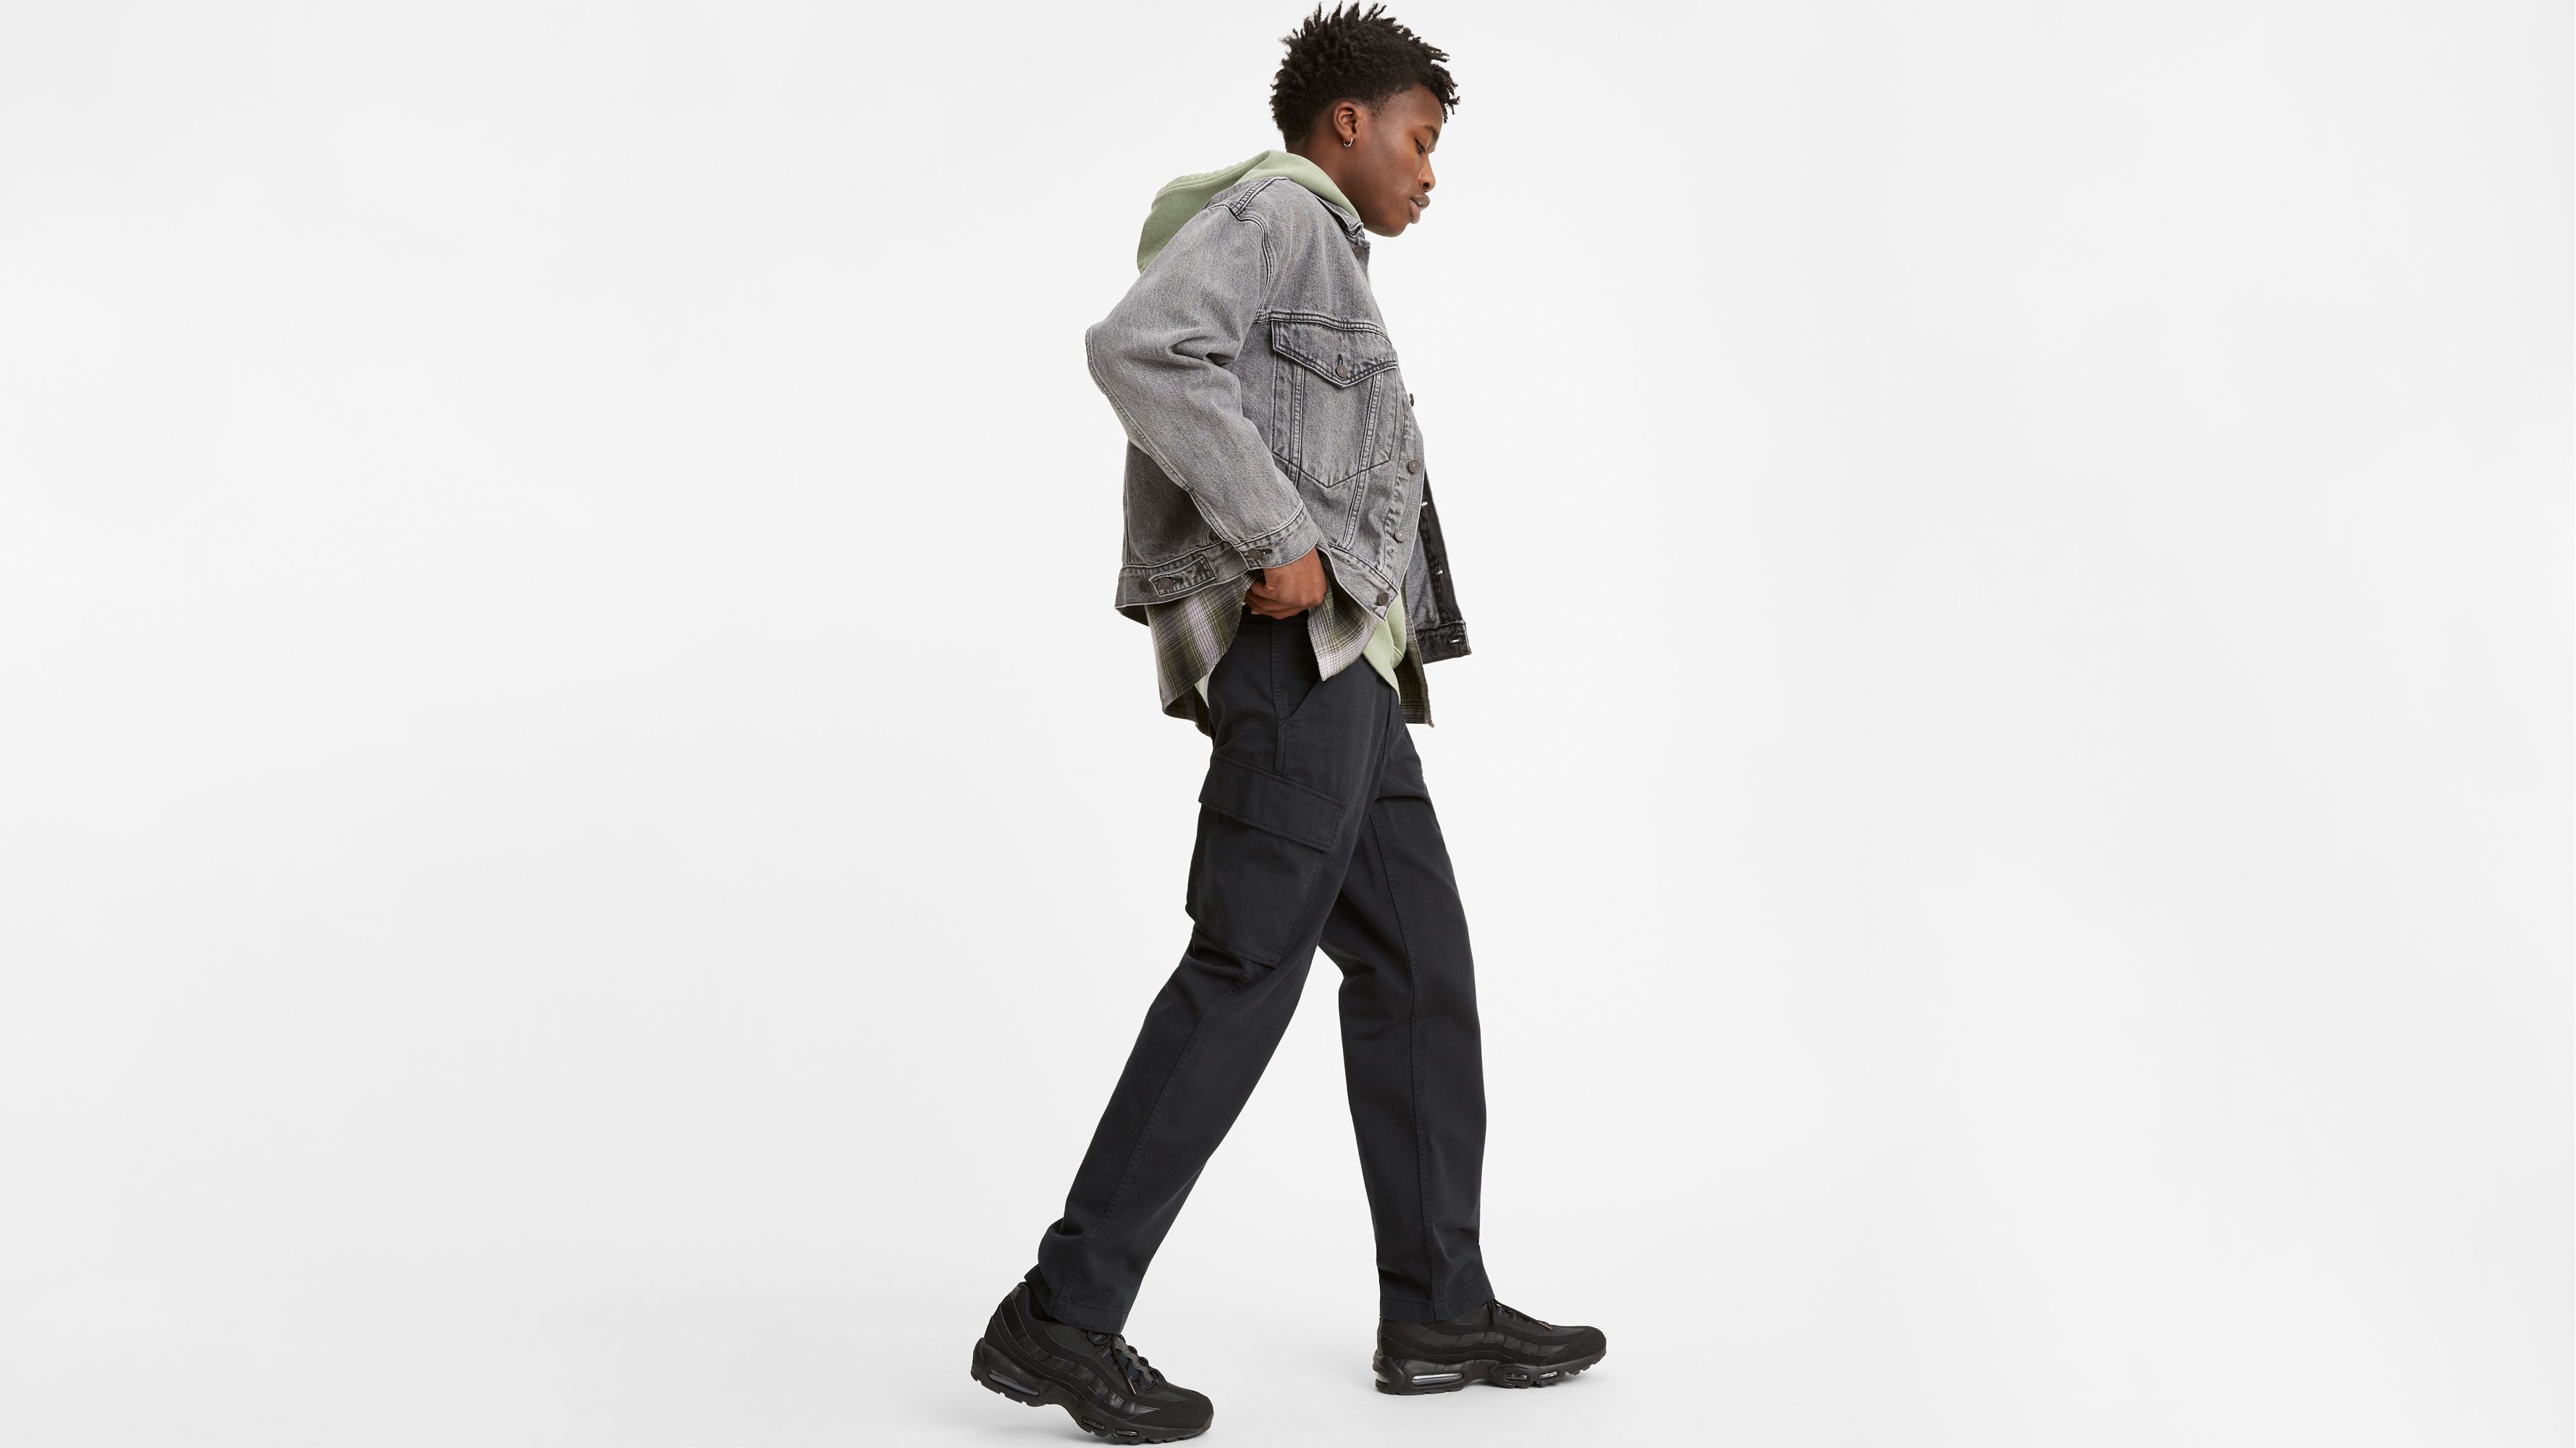 levis mens cargo pants relaxed fit